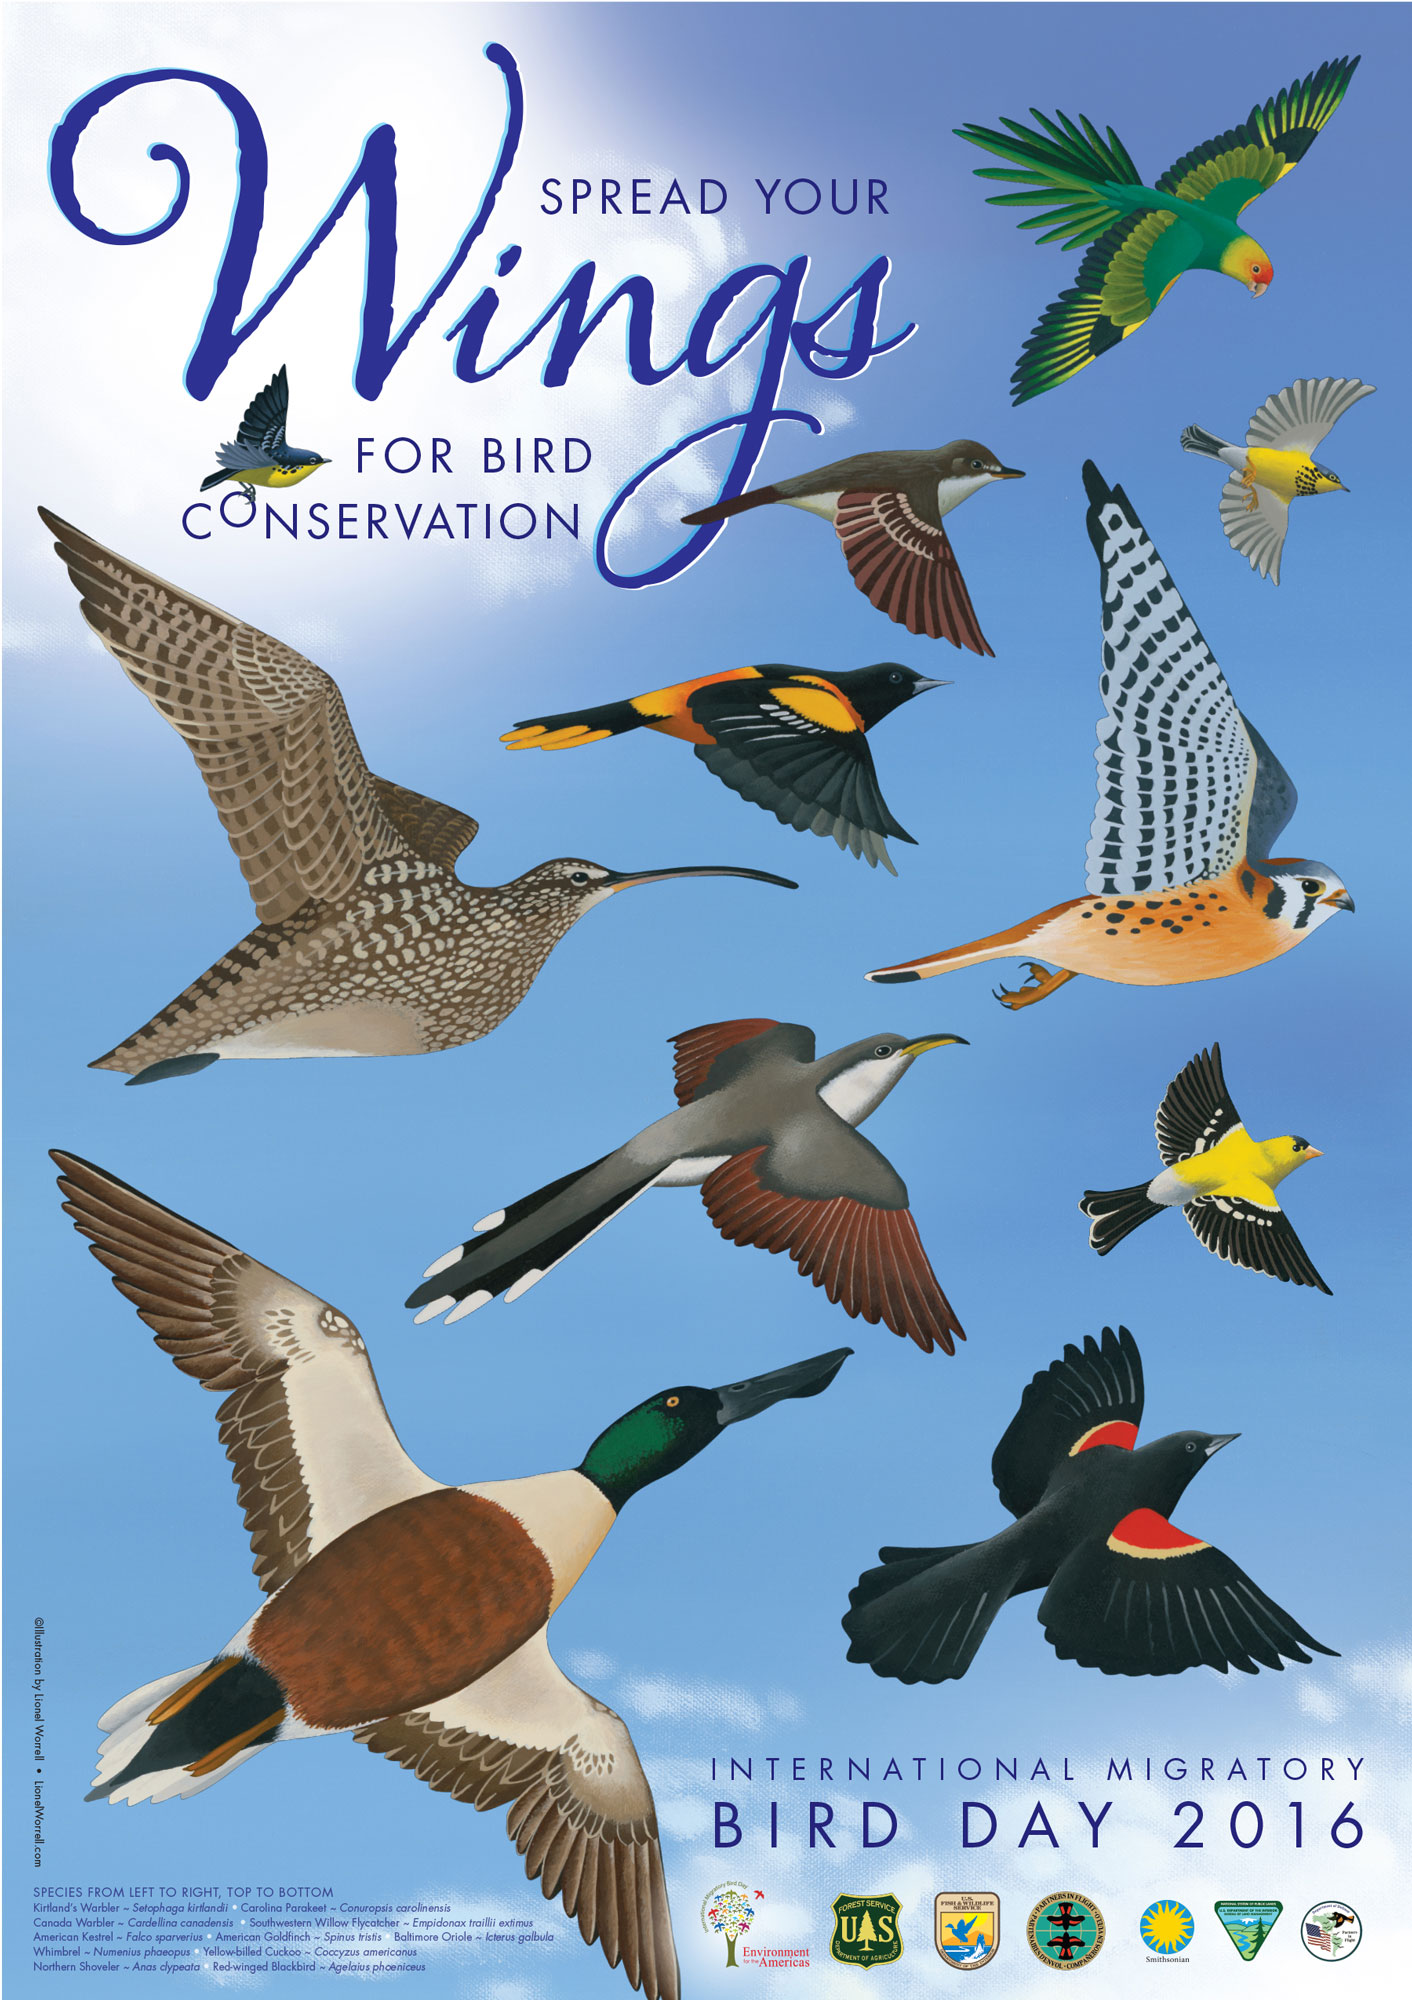 Spreading Our Wings for International Migratory Bird Day 2016